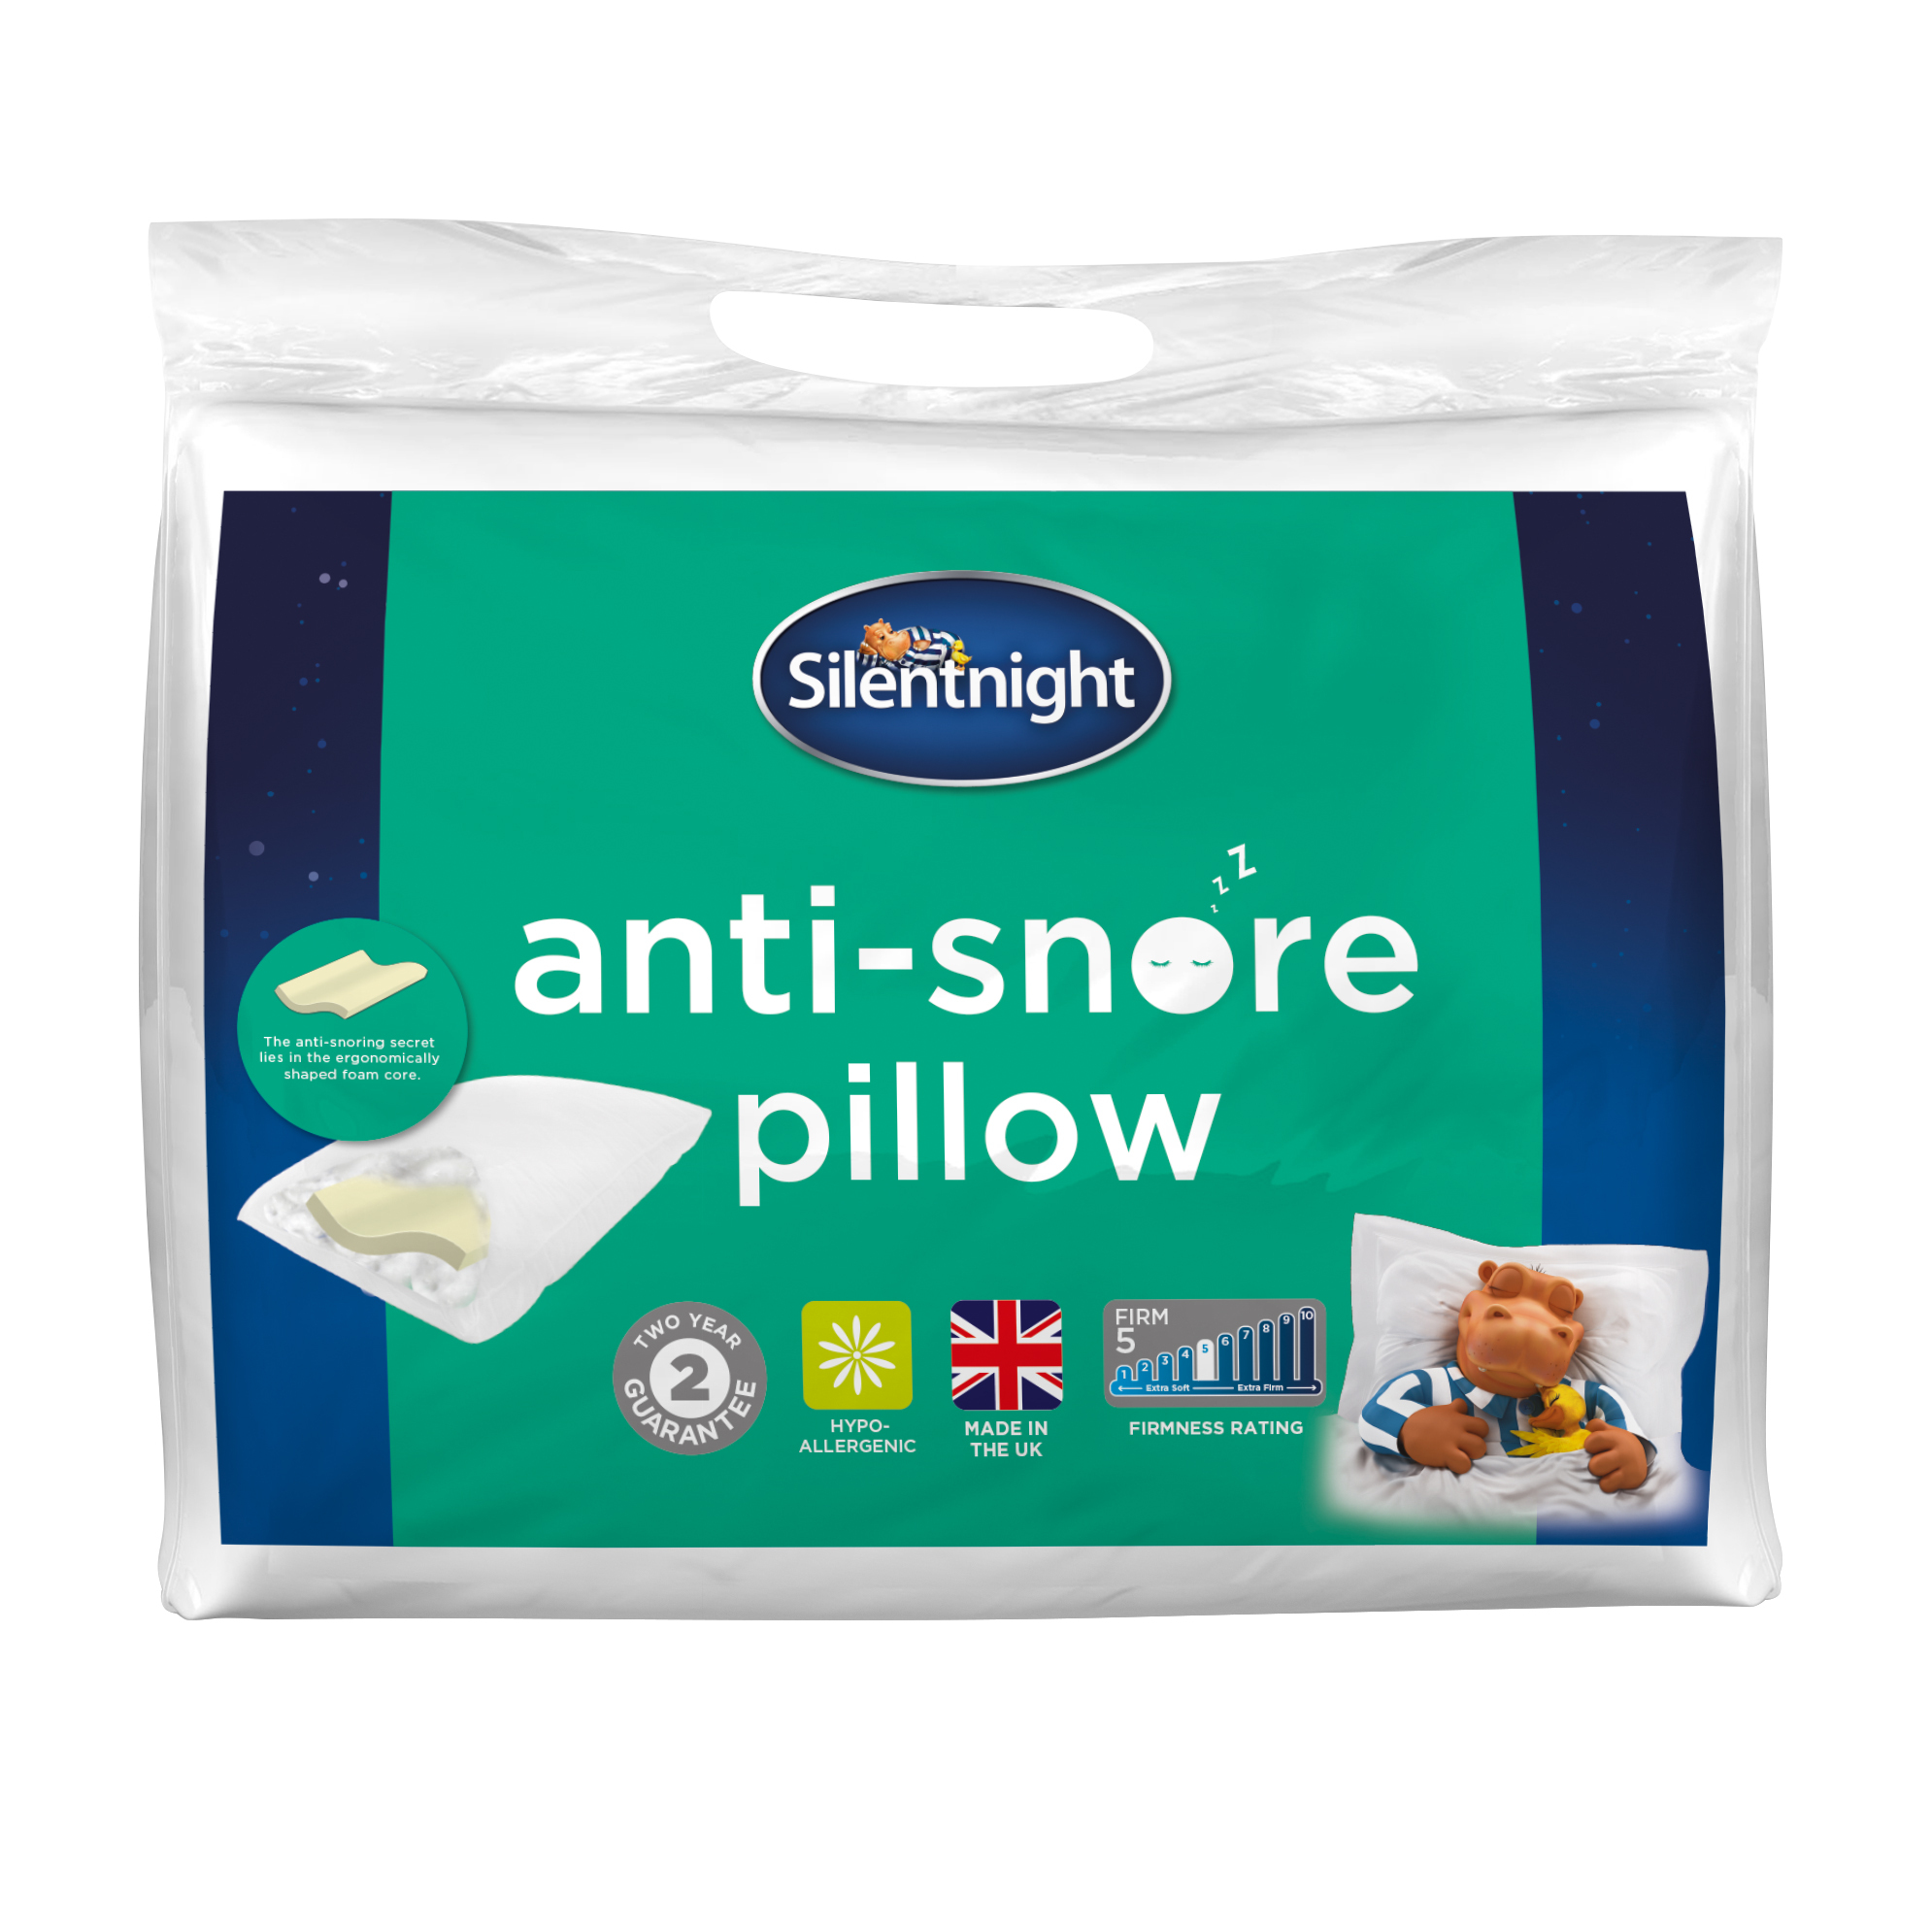 Anti-snore pillows can help with a noisy partner 